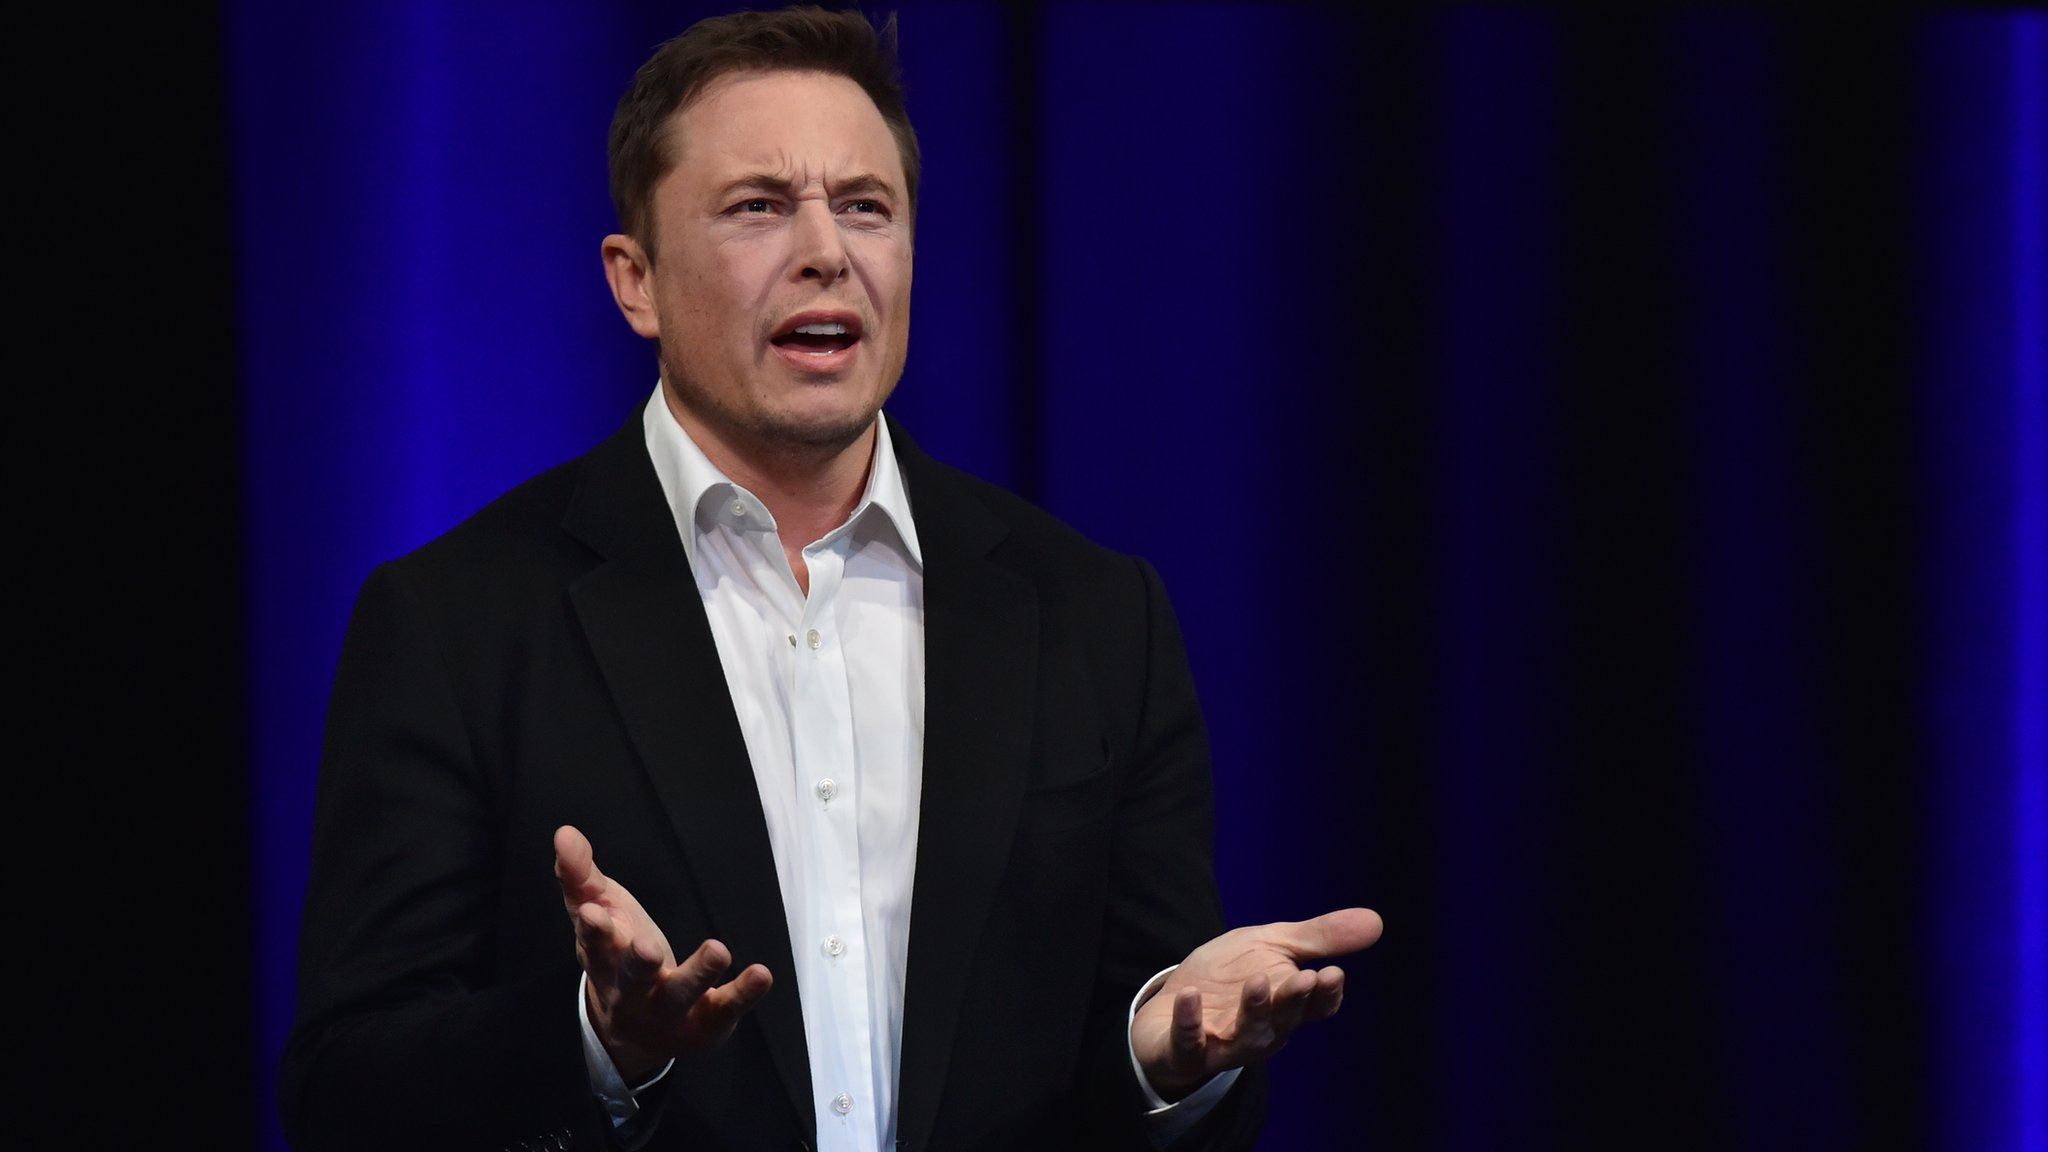 Billionaire entrepreneur and founder of SpaceX Elon Musk speaks at the 68th International Astronautical Congress 2017 in Adelaide on September 29, 2017